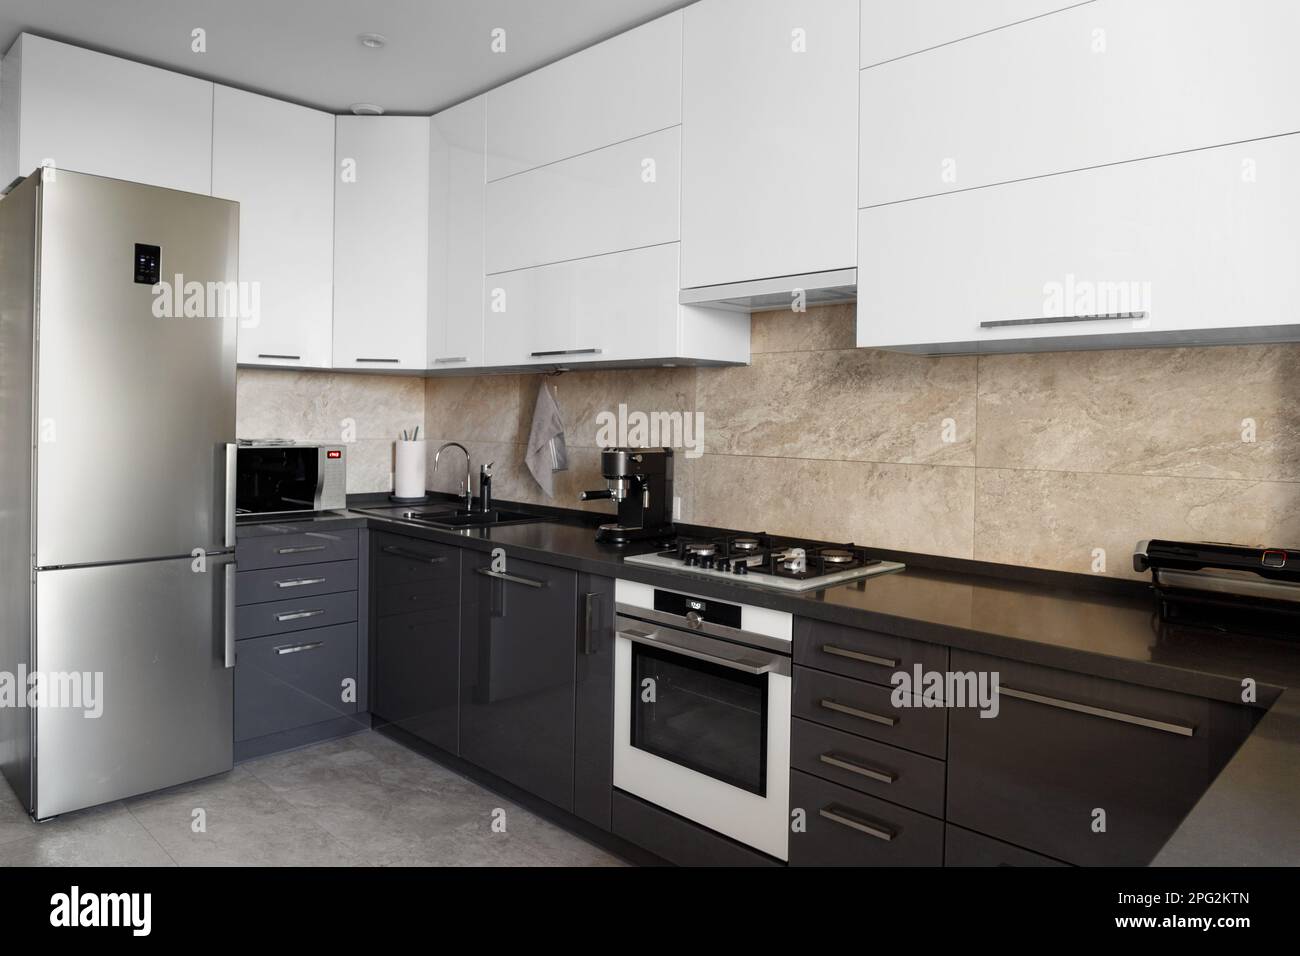 The kitchen in the apartment. The design of the kitchen room. Gray kitchen interior with white cabinets. Built-in oven in the interior of the kitchen. Stock Photo